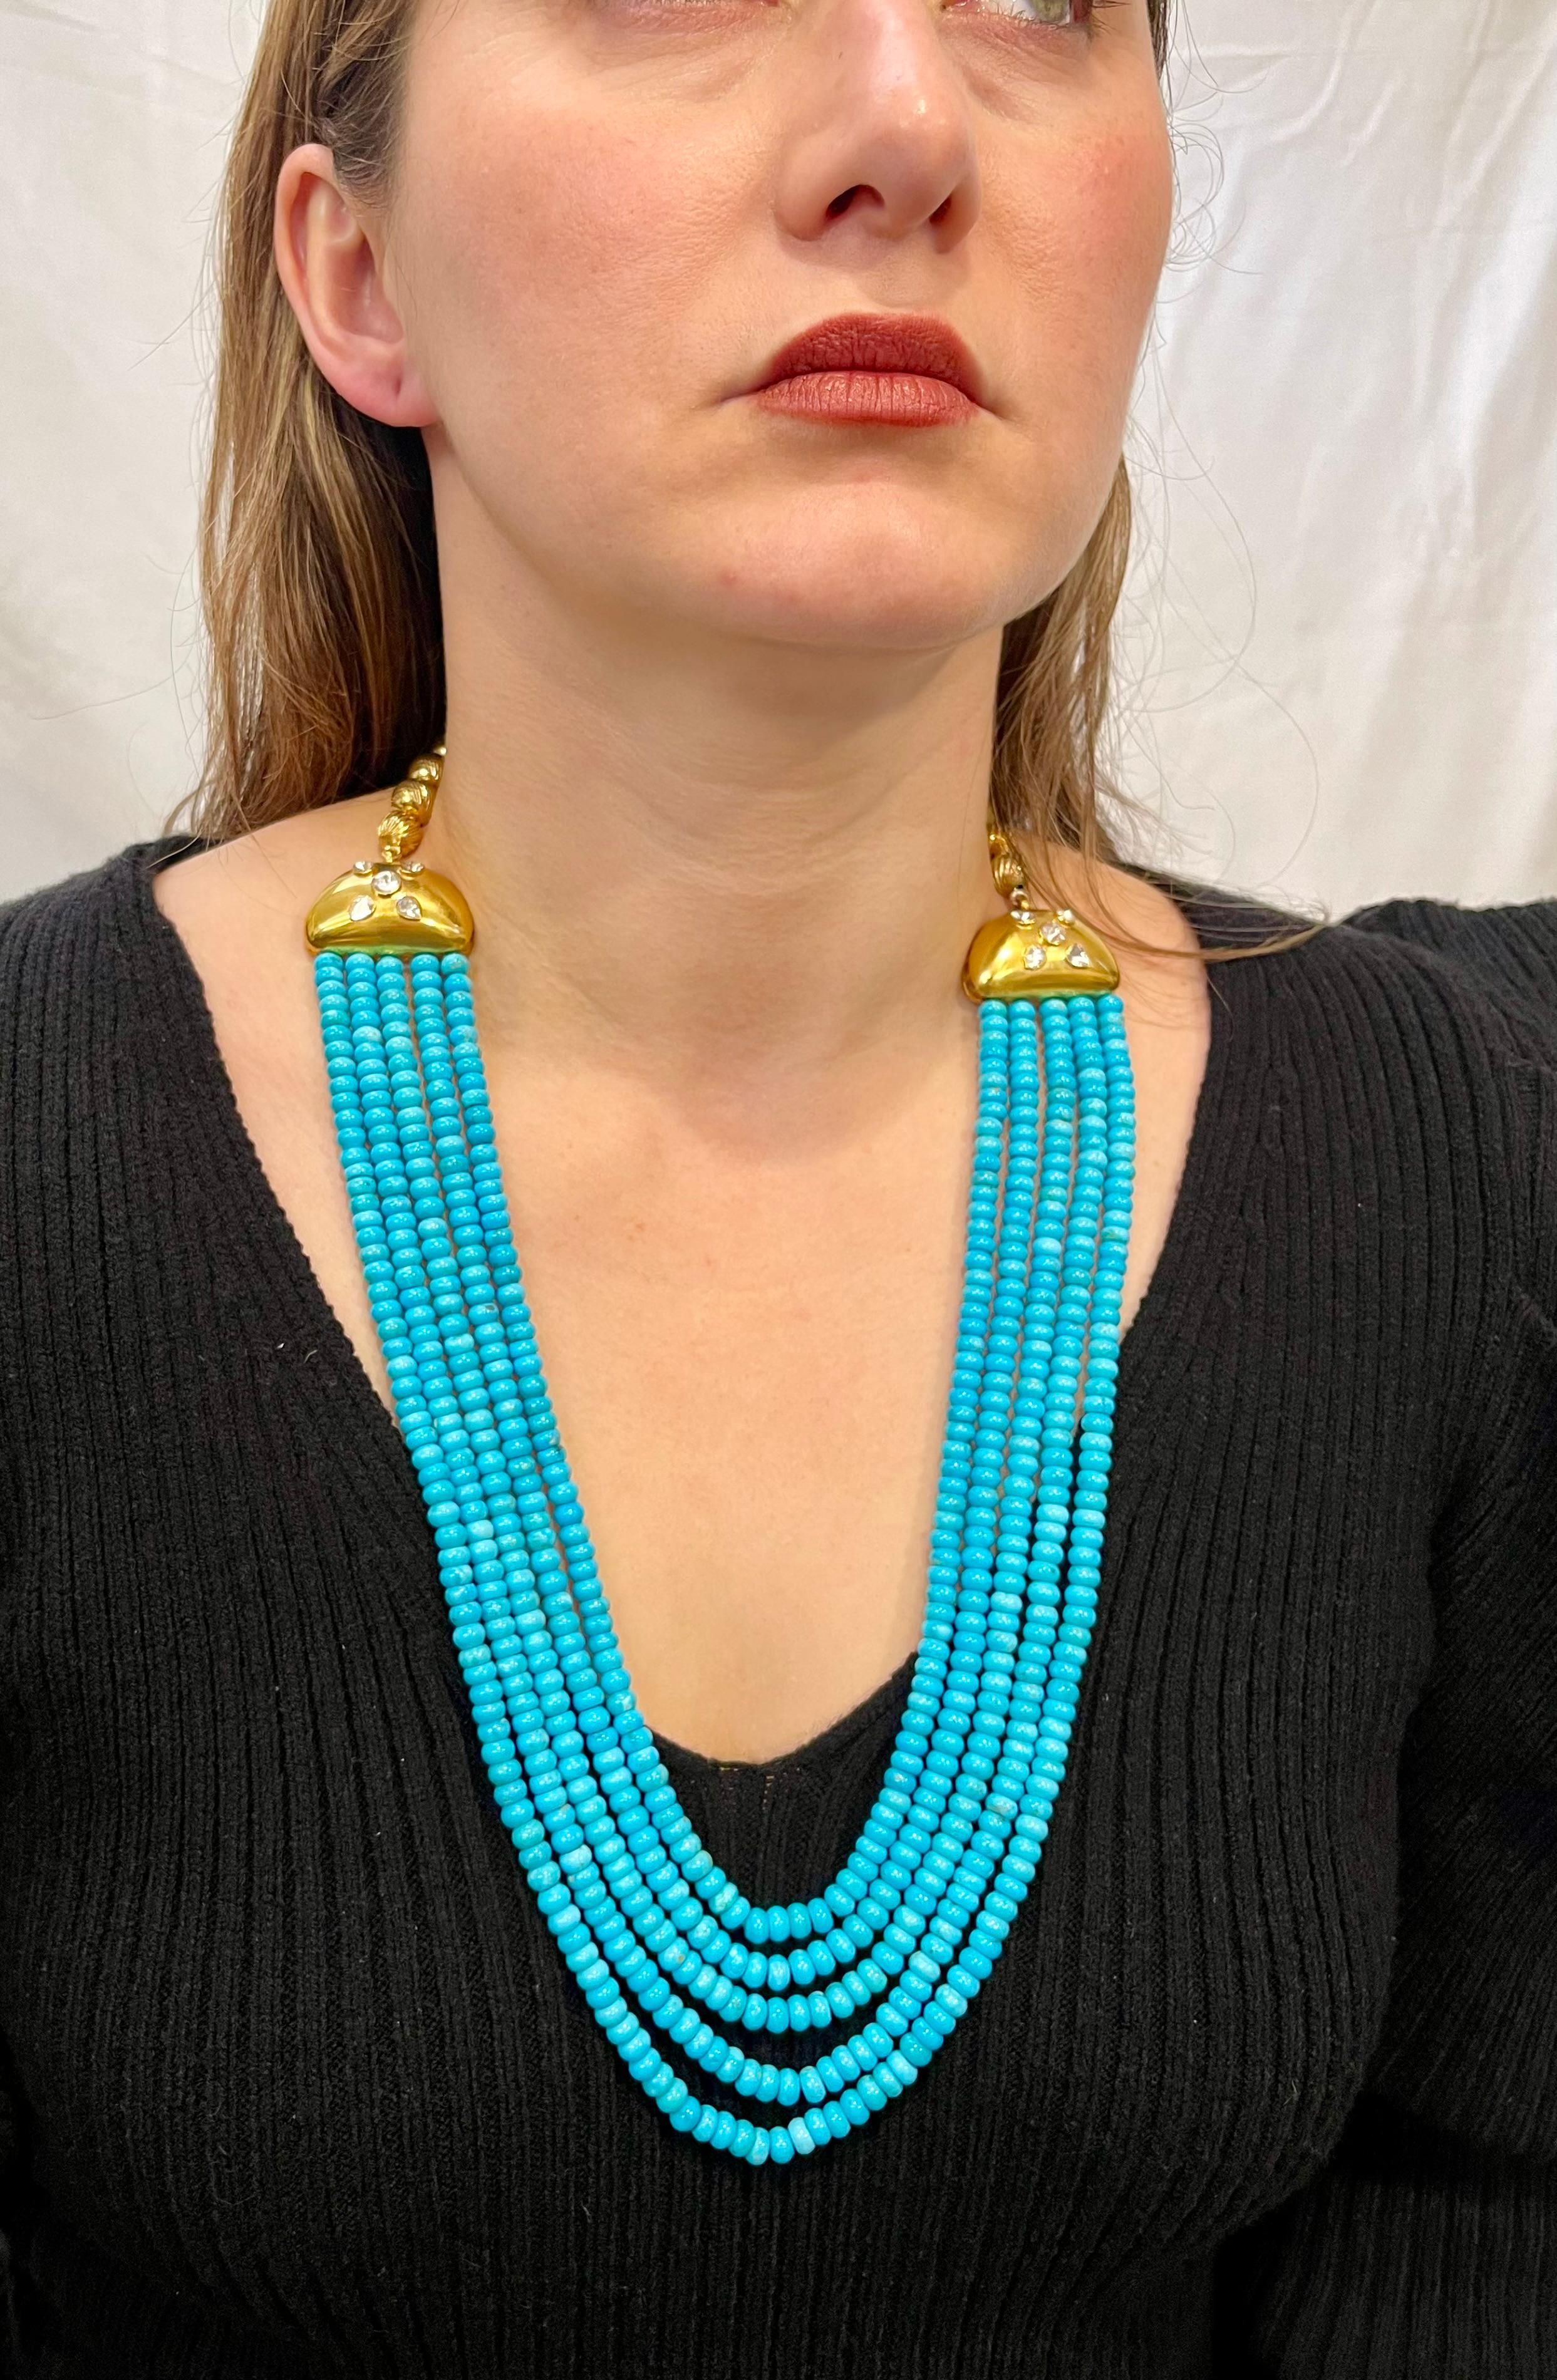 700 Ct Natural Sleeping Beauty Turquoise Necklace + Diamond 5 Strand 14 Kt Gold In Excellent Condition For Sale In New York, NY